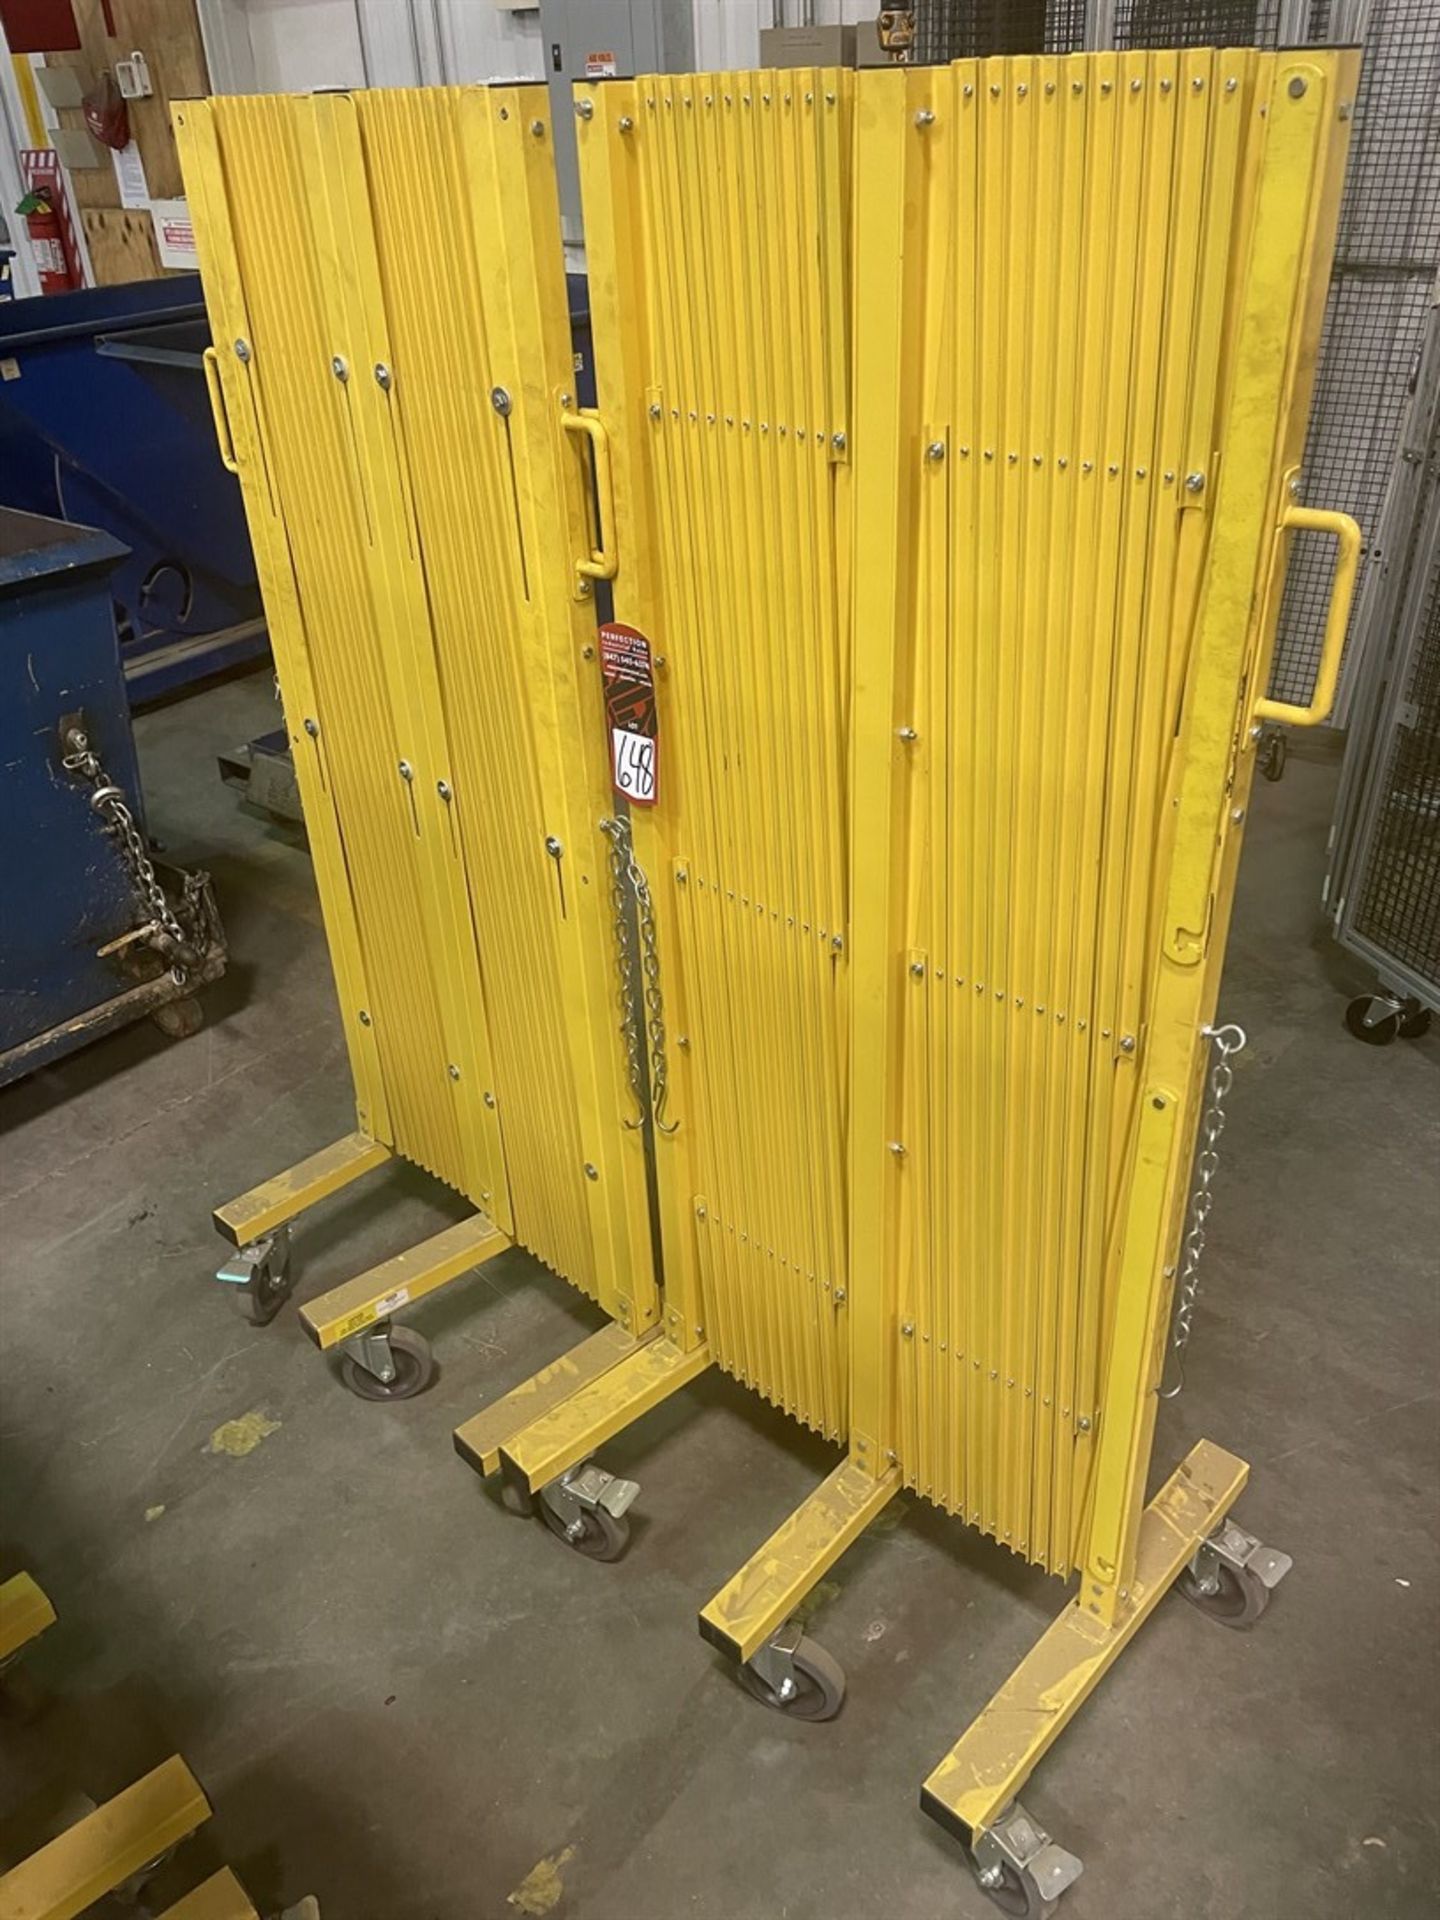 Lot Consisting of (2) Uline H-7604 Safety Barricade Gates